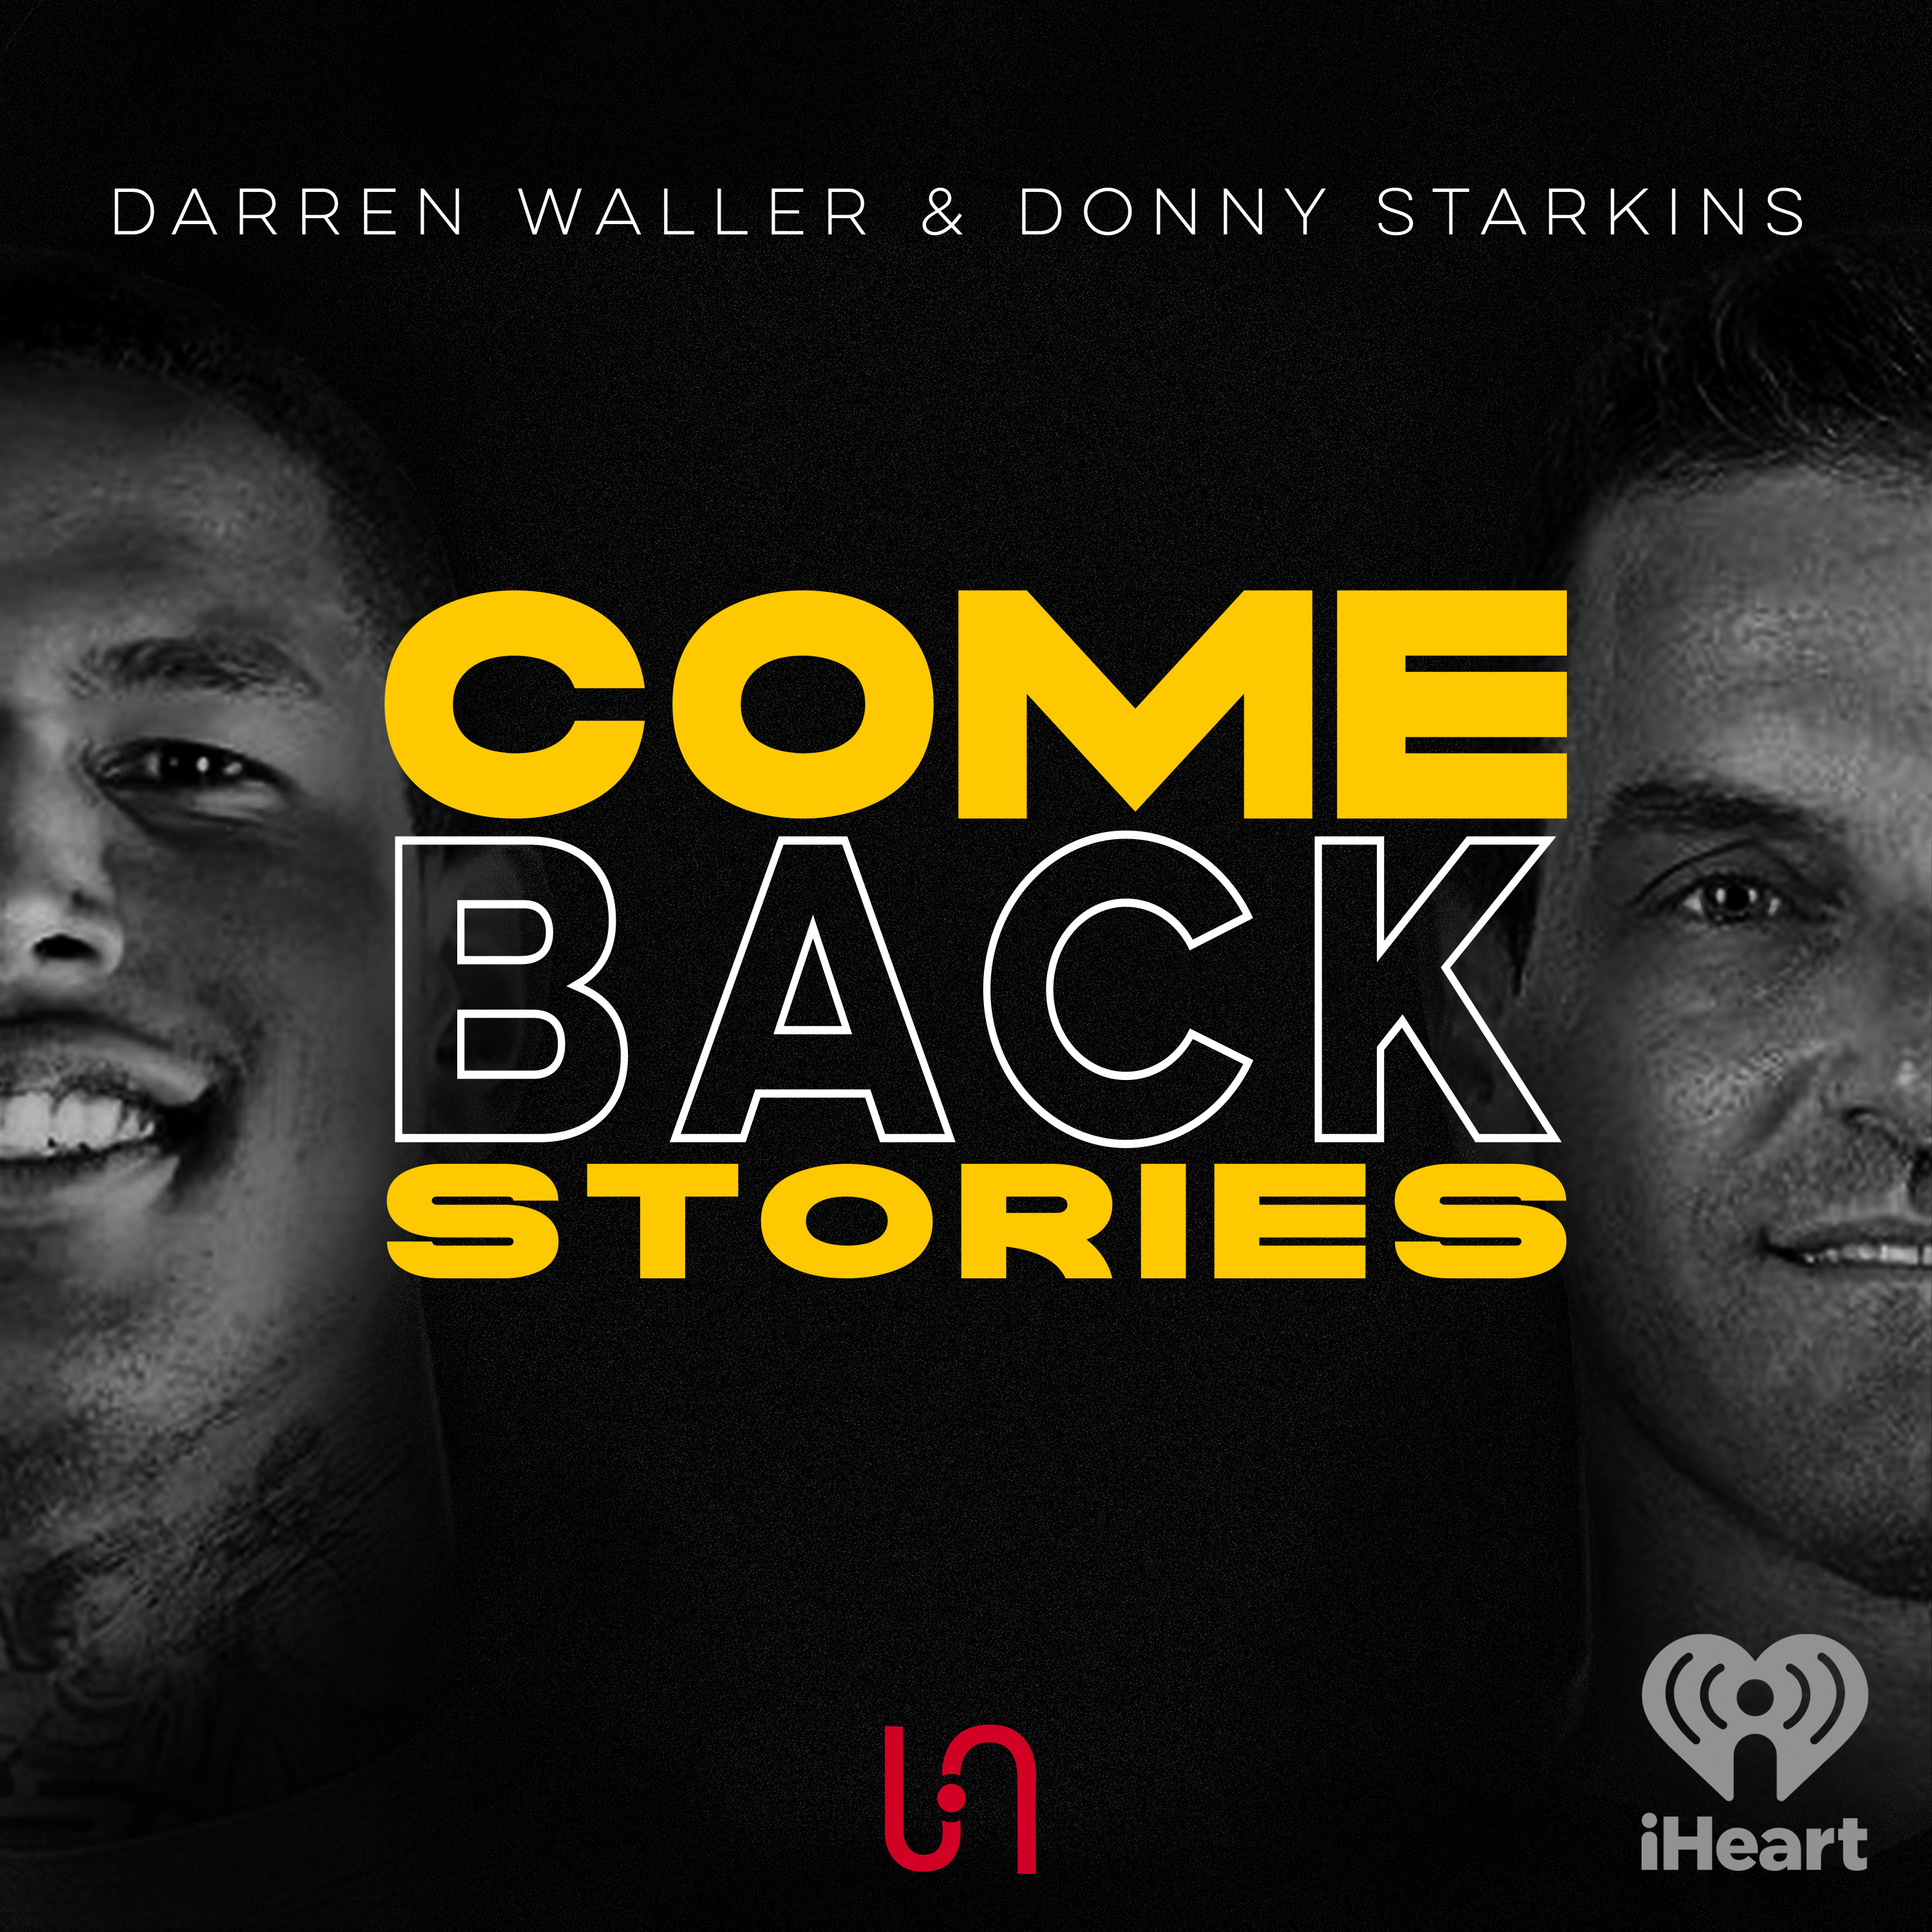 Introducing: Comeback Stories